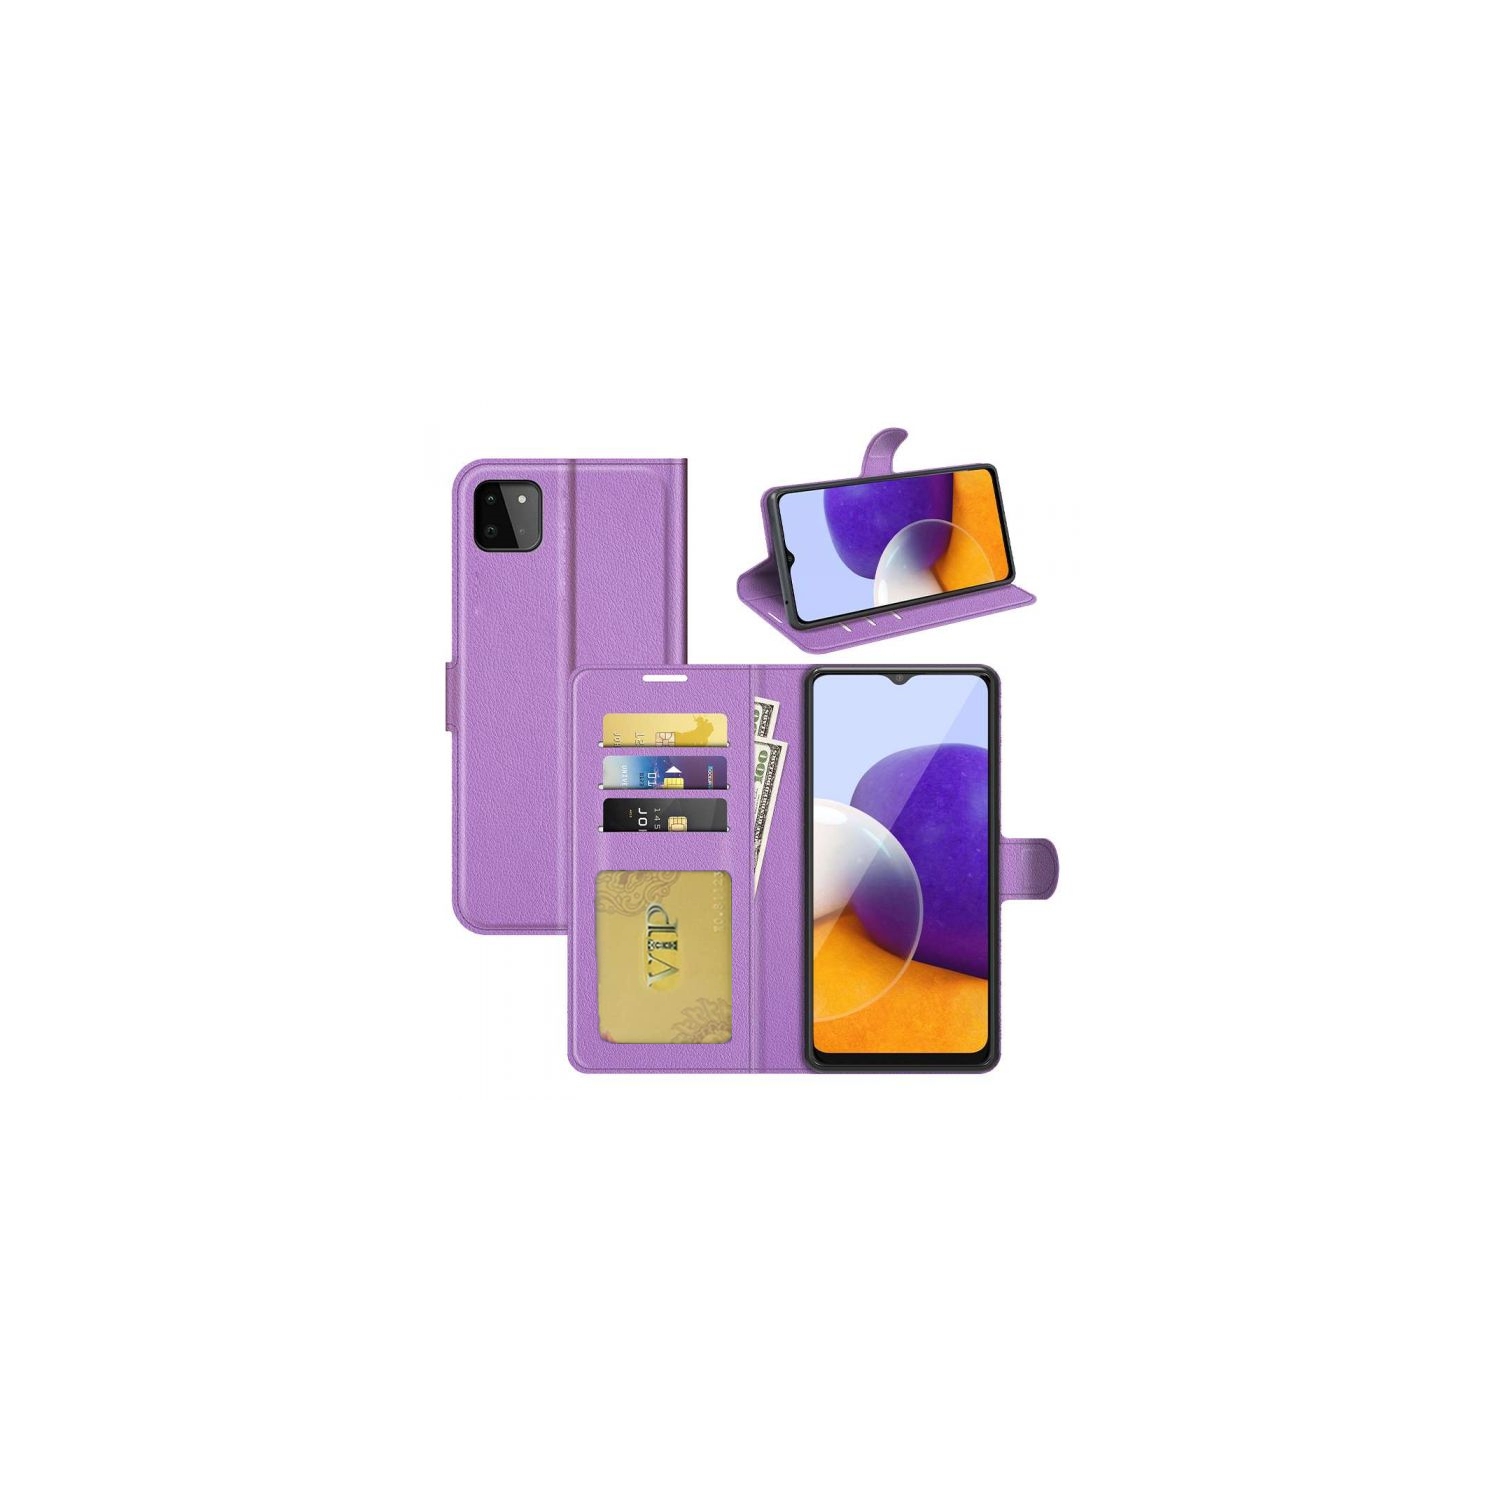 [CS] Samsung Galaxy A22 5G Case, Magnetic Leather Folio Wallet Flip Case Cover with Card Slot, Purple